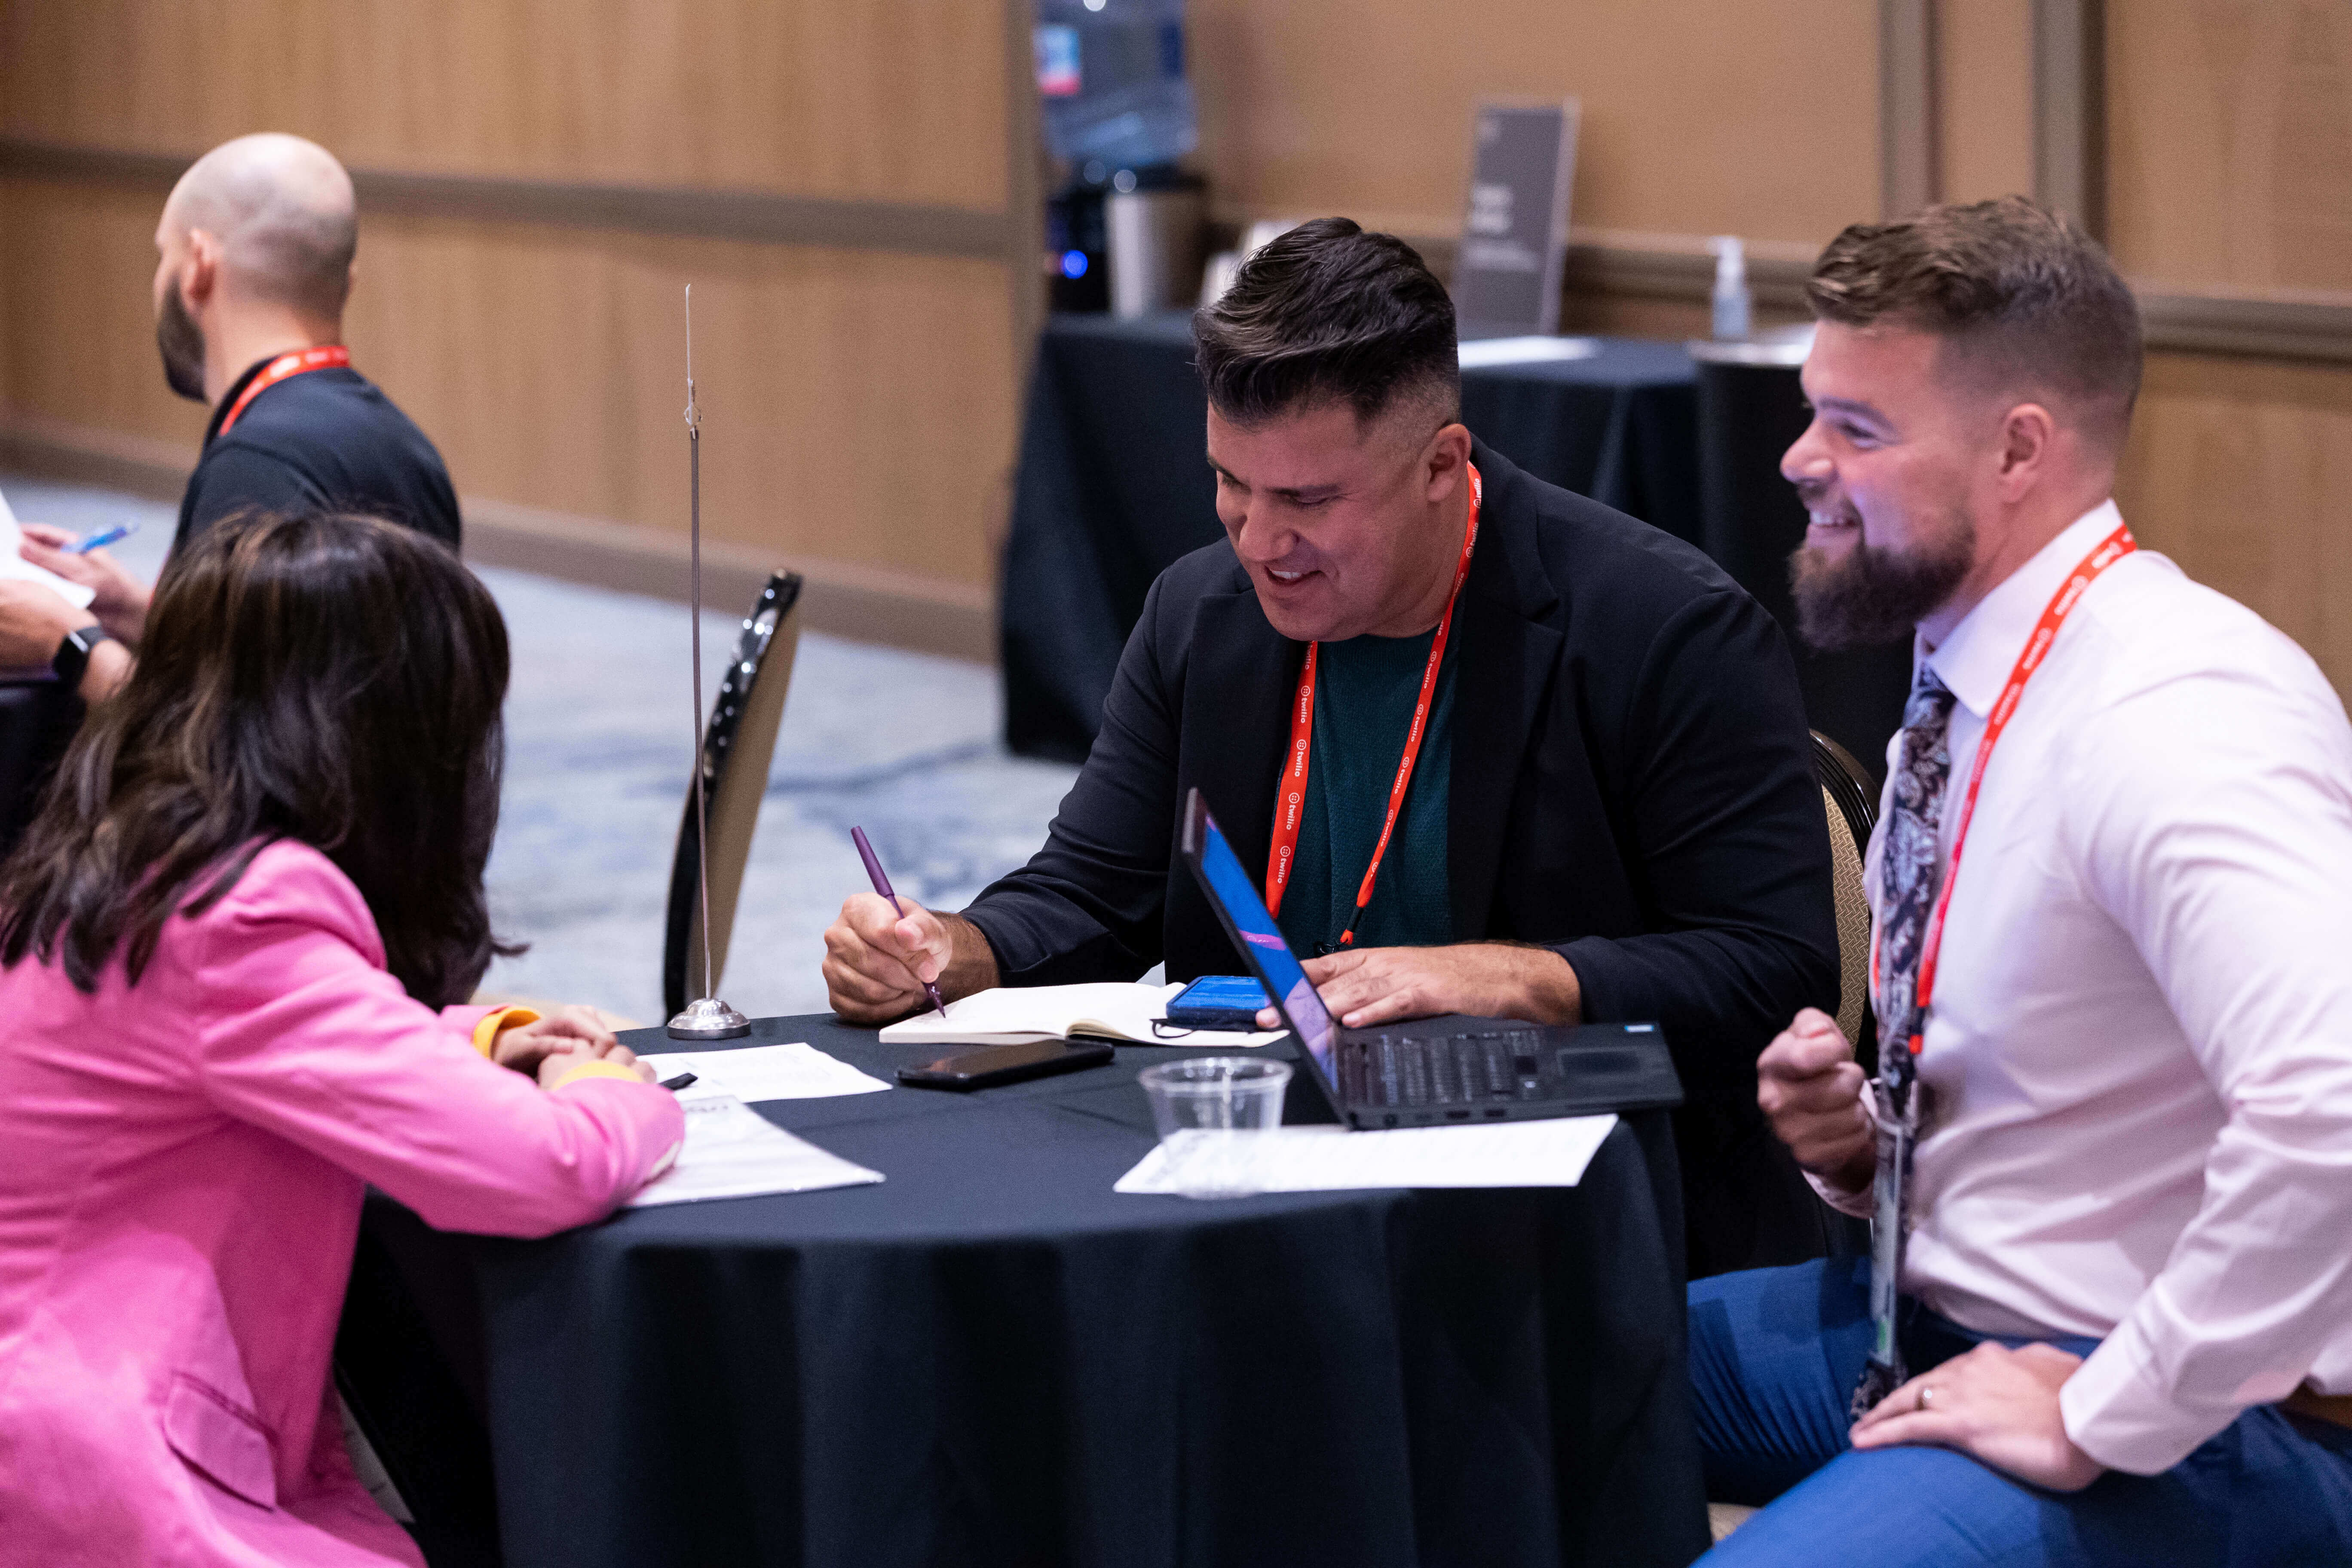 Two recruiters happily talking to a candidate at a conference